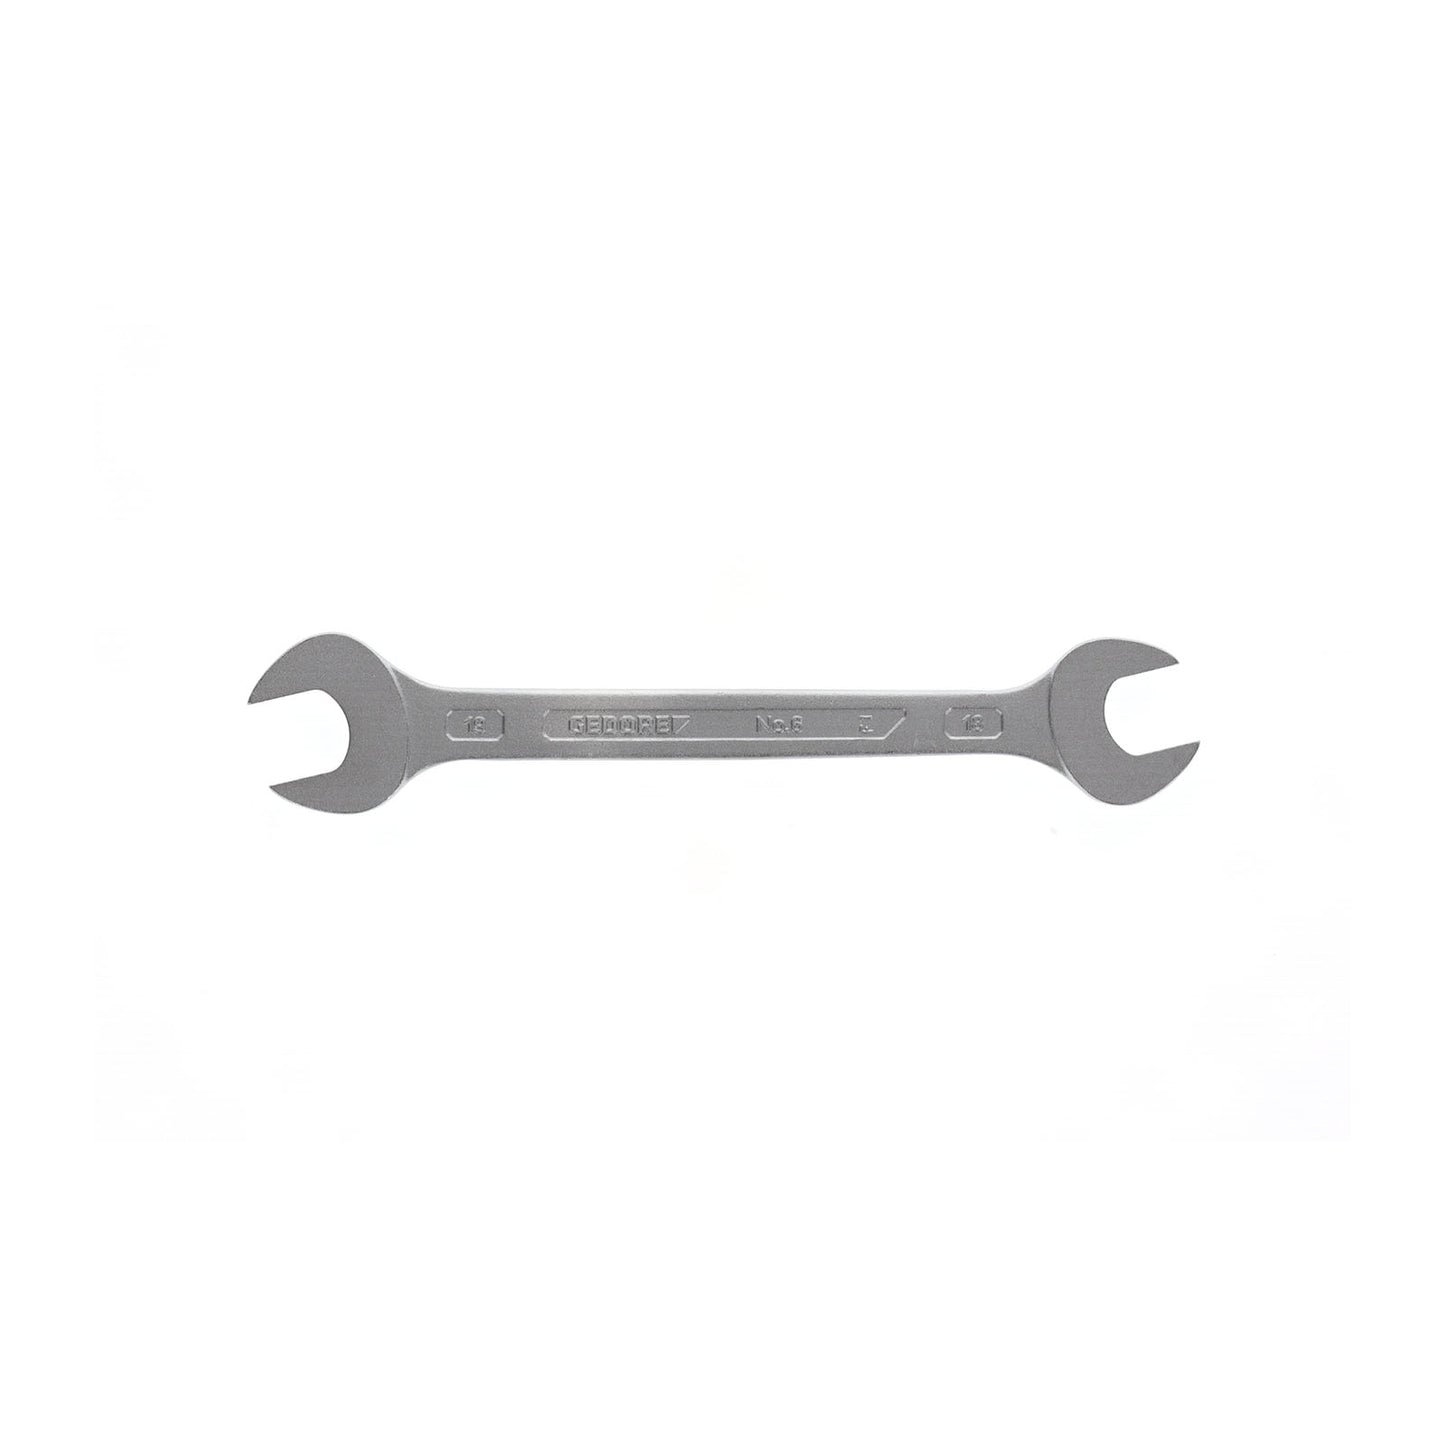 GEDORE 6 18X19 - 2-Mount Fixed Wrench, 18x19 (6066500)